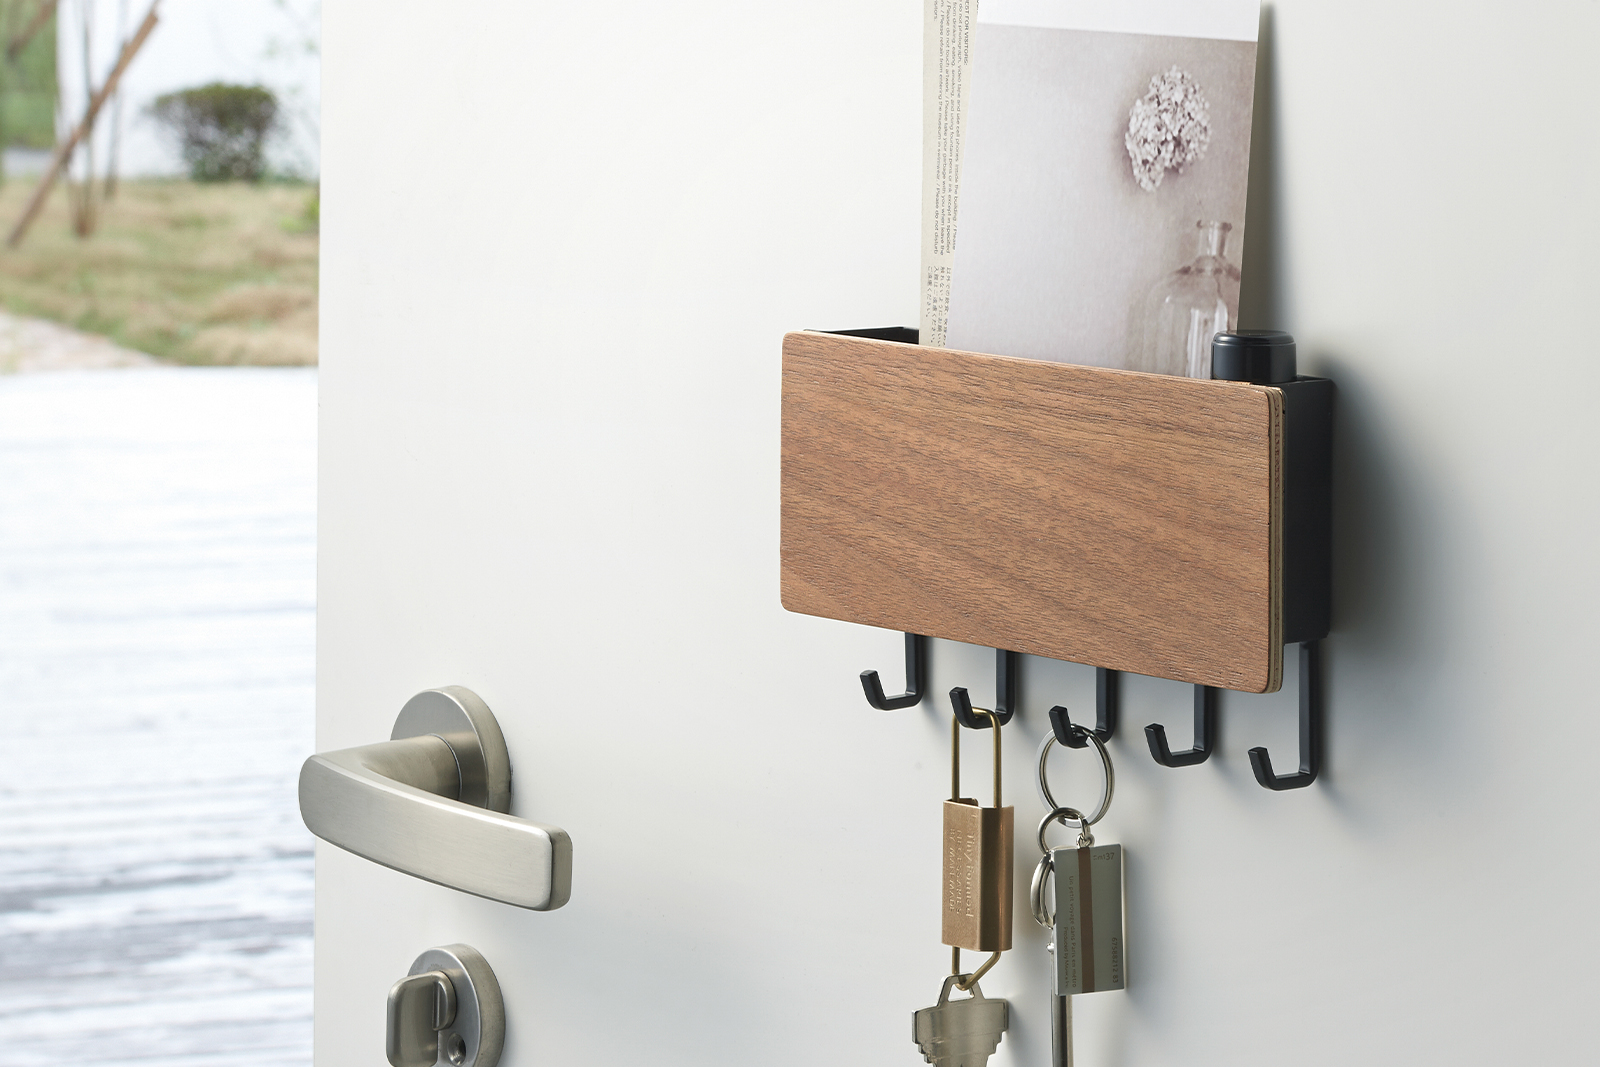 Magnetic Key Holder holding keys and paper items on door by Yamazaki Home.